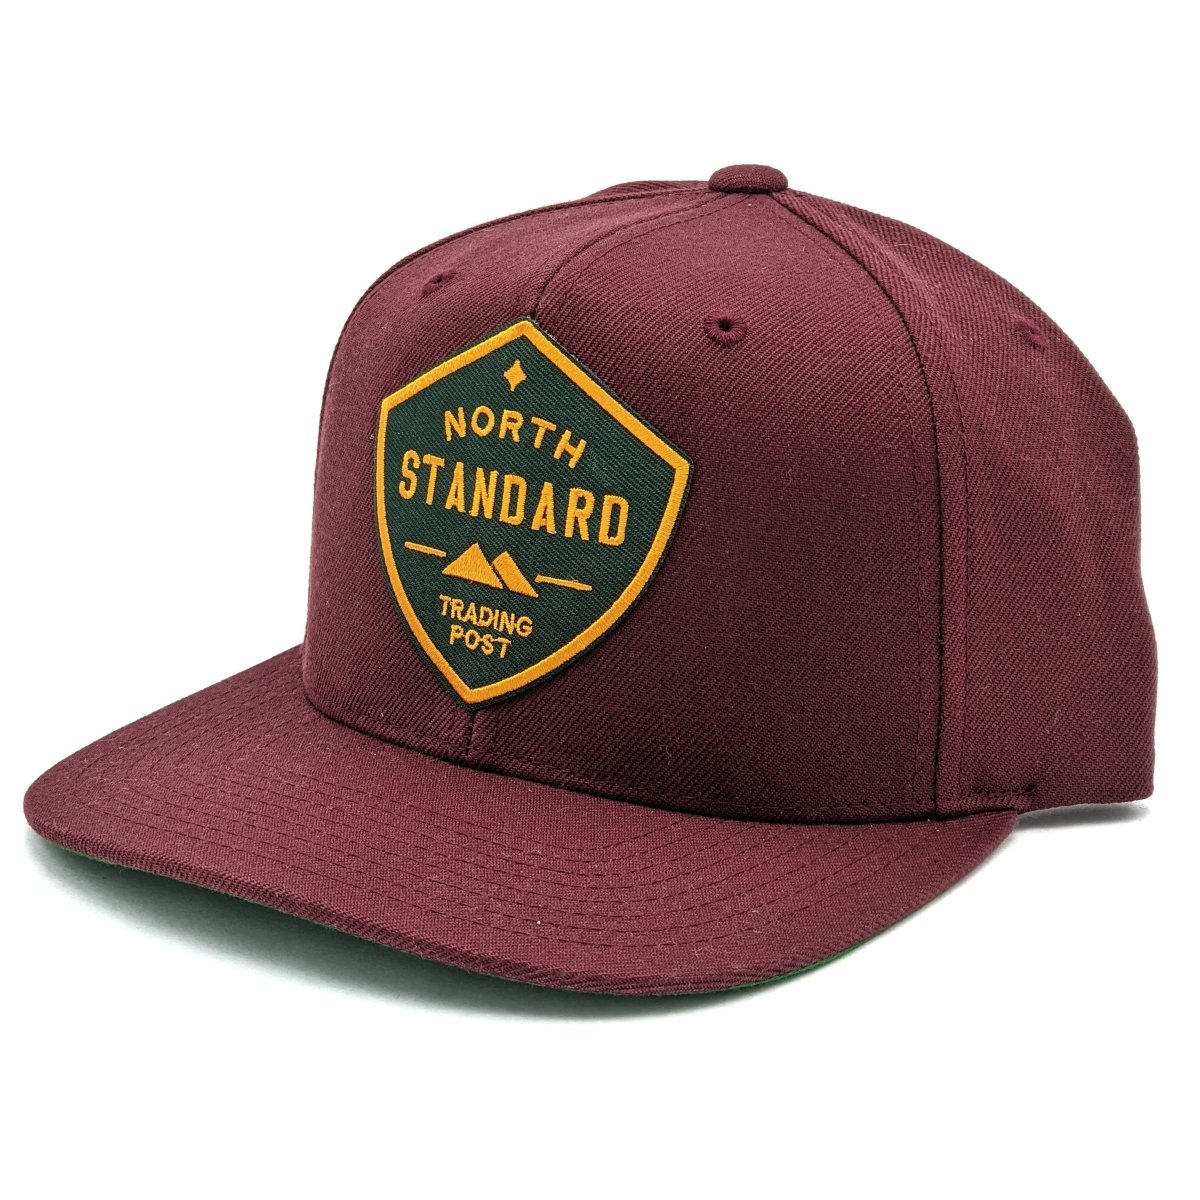 Adult Shield Snapback Hat - Maroon w/Spruce Patch - North Standard Trading Post